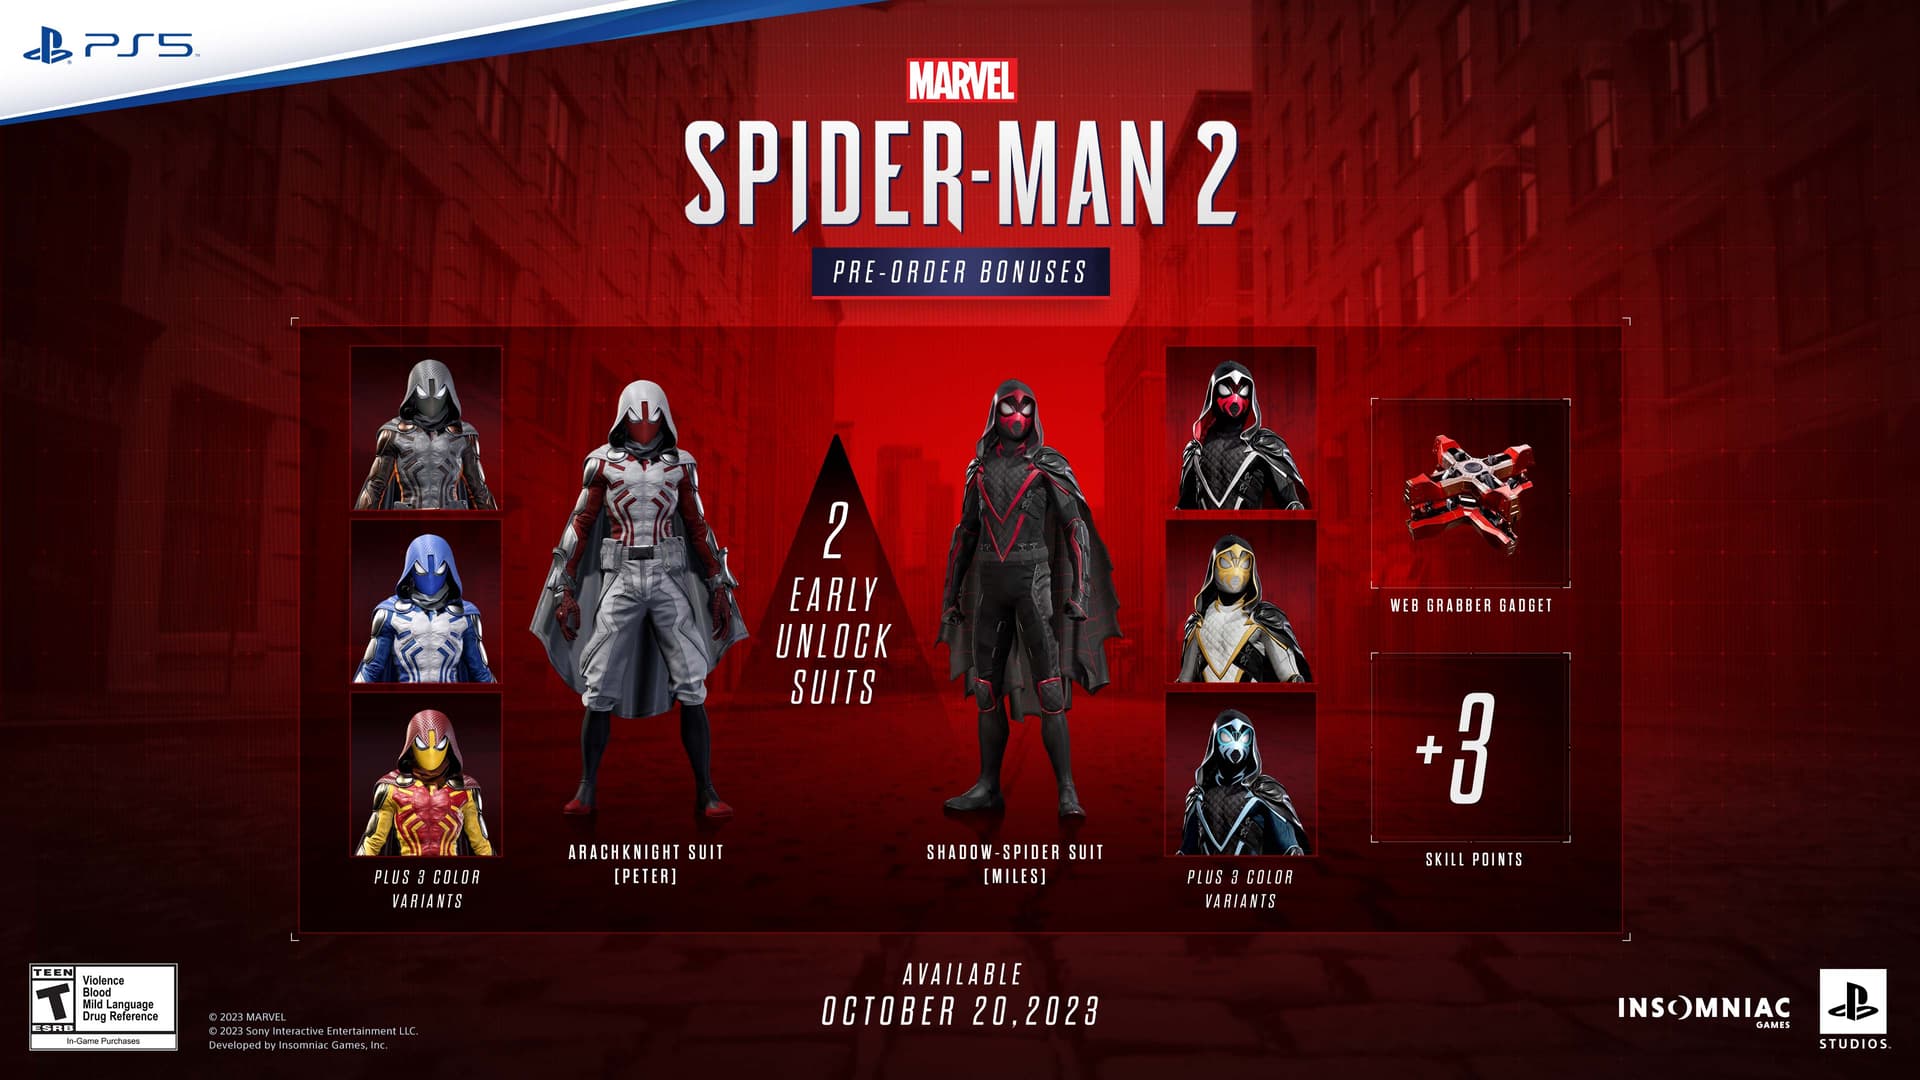 The pre-order bonuses for Spider-Man 2 from Insomniac Games